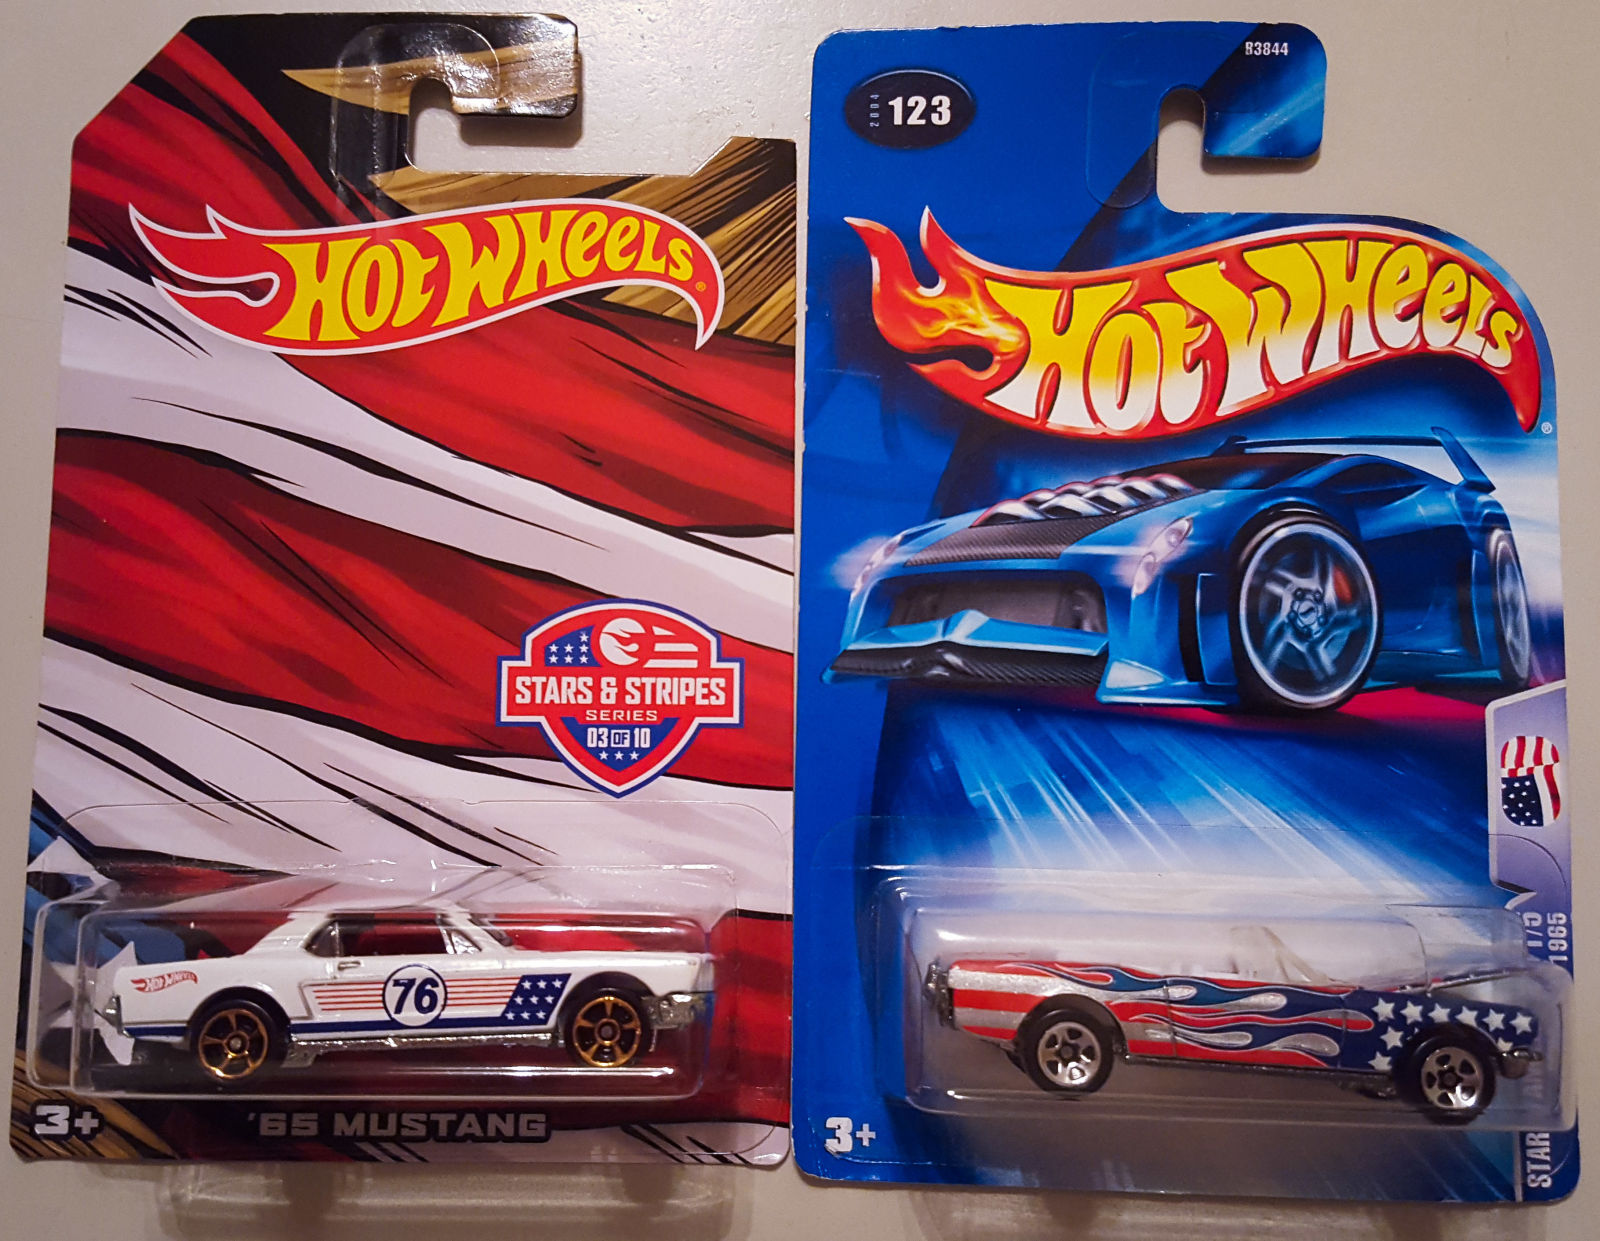 Forgot to show the Stars and Stripes Mustang and thought how appropriate to display with it’s sibling. Would buy the whole flag set, but at $2 apiece for 10 cars, I’ll pass.